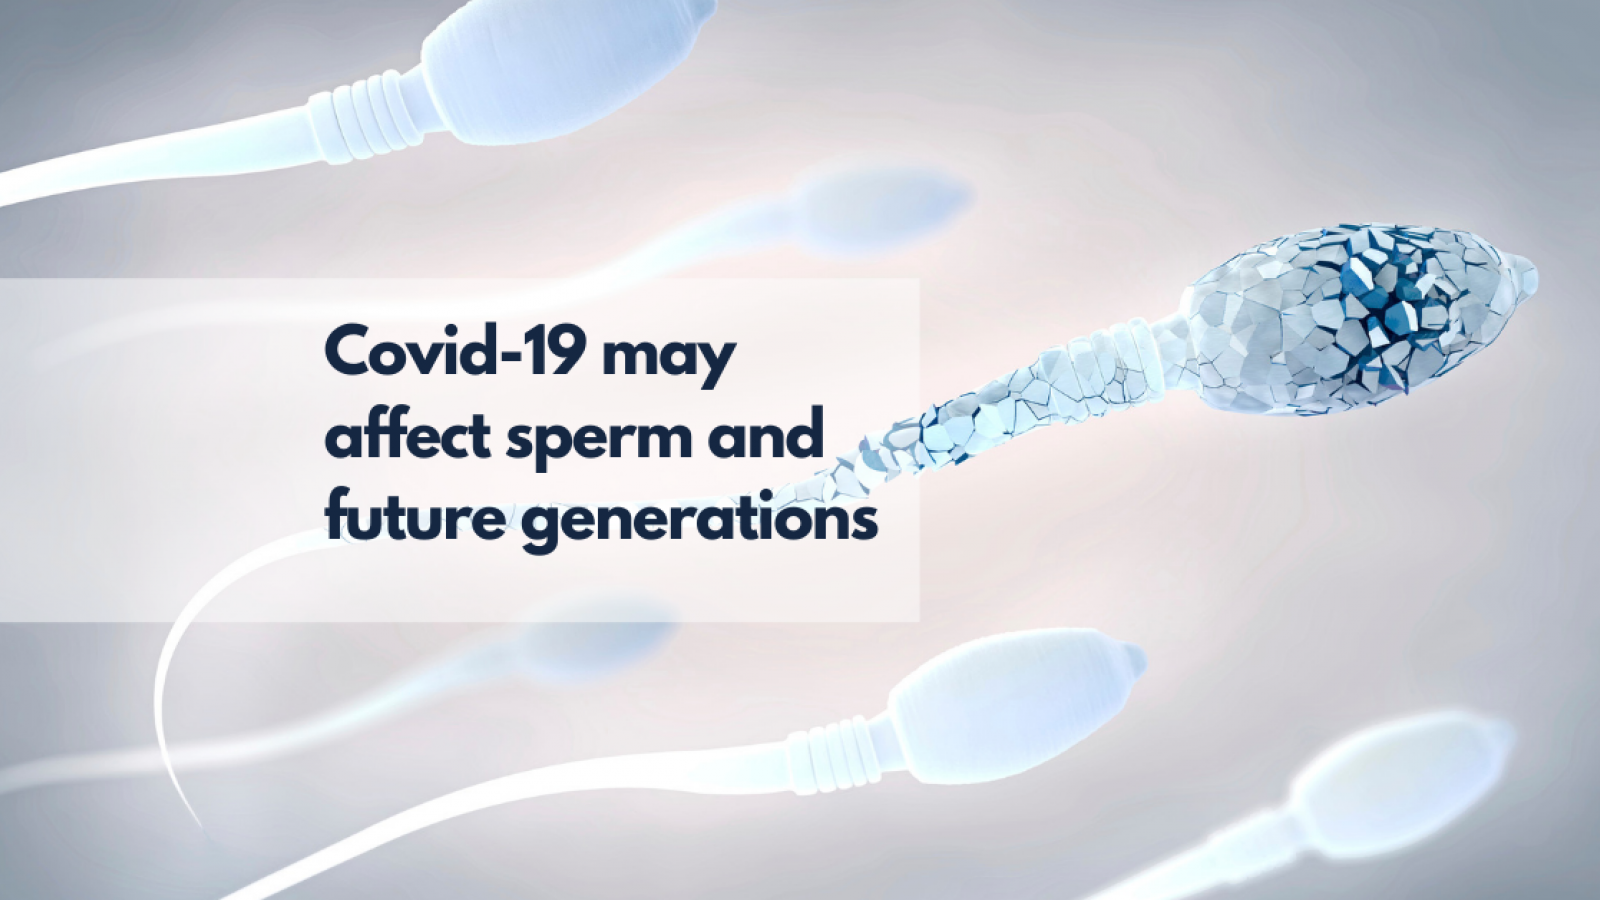 Covid-19 may affect sperm and future generations